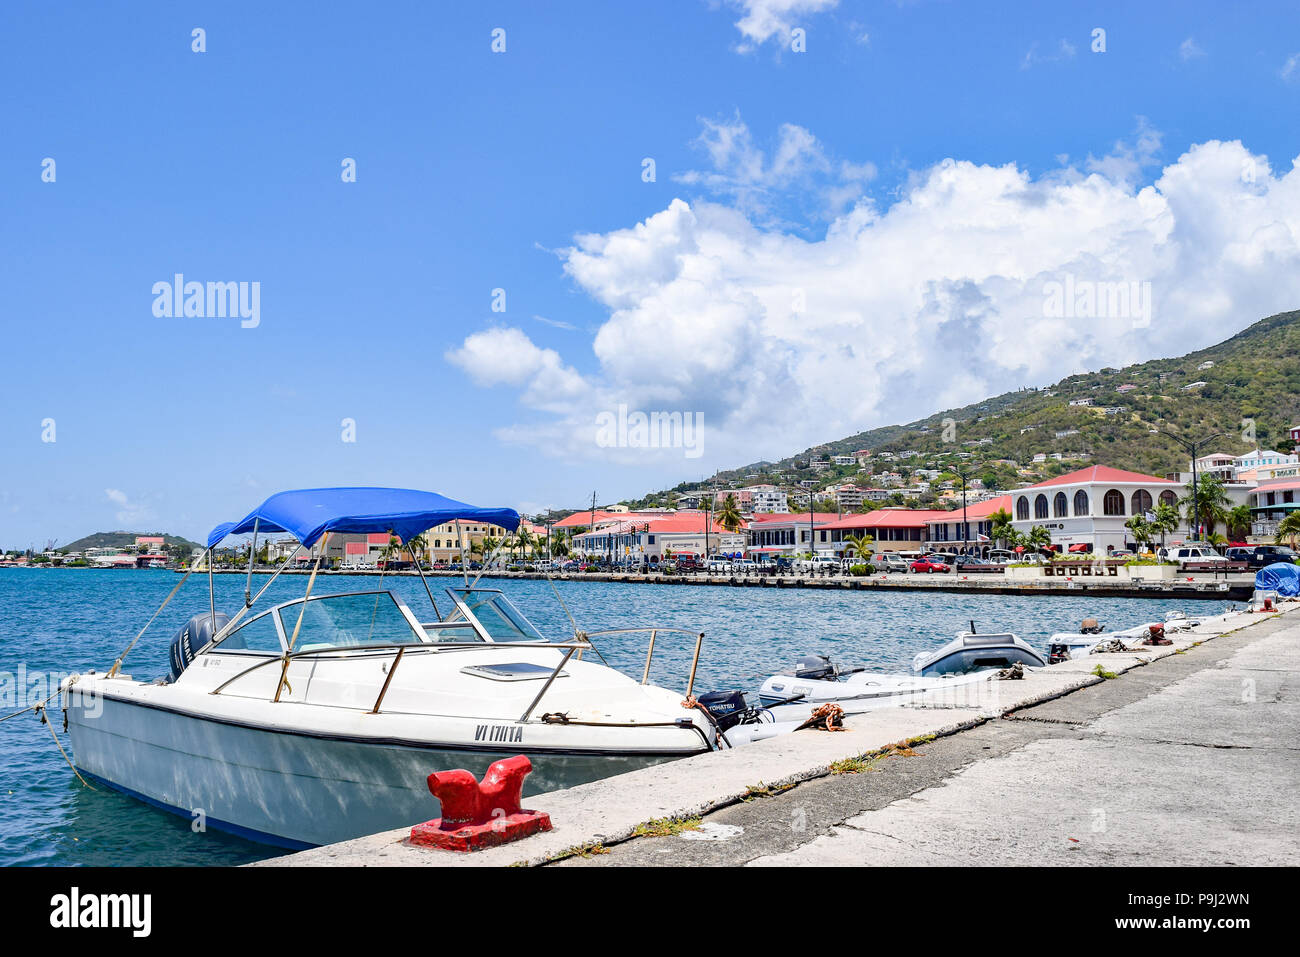 Saint Thomas, US Virgin Islands - April 01 2014: A sailboat and some speedboats docked in downtown Saint Thomas in the US Virgin Islands. Stock Photo